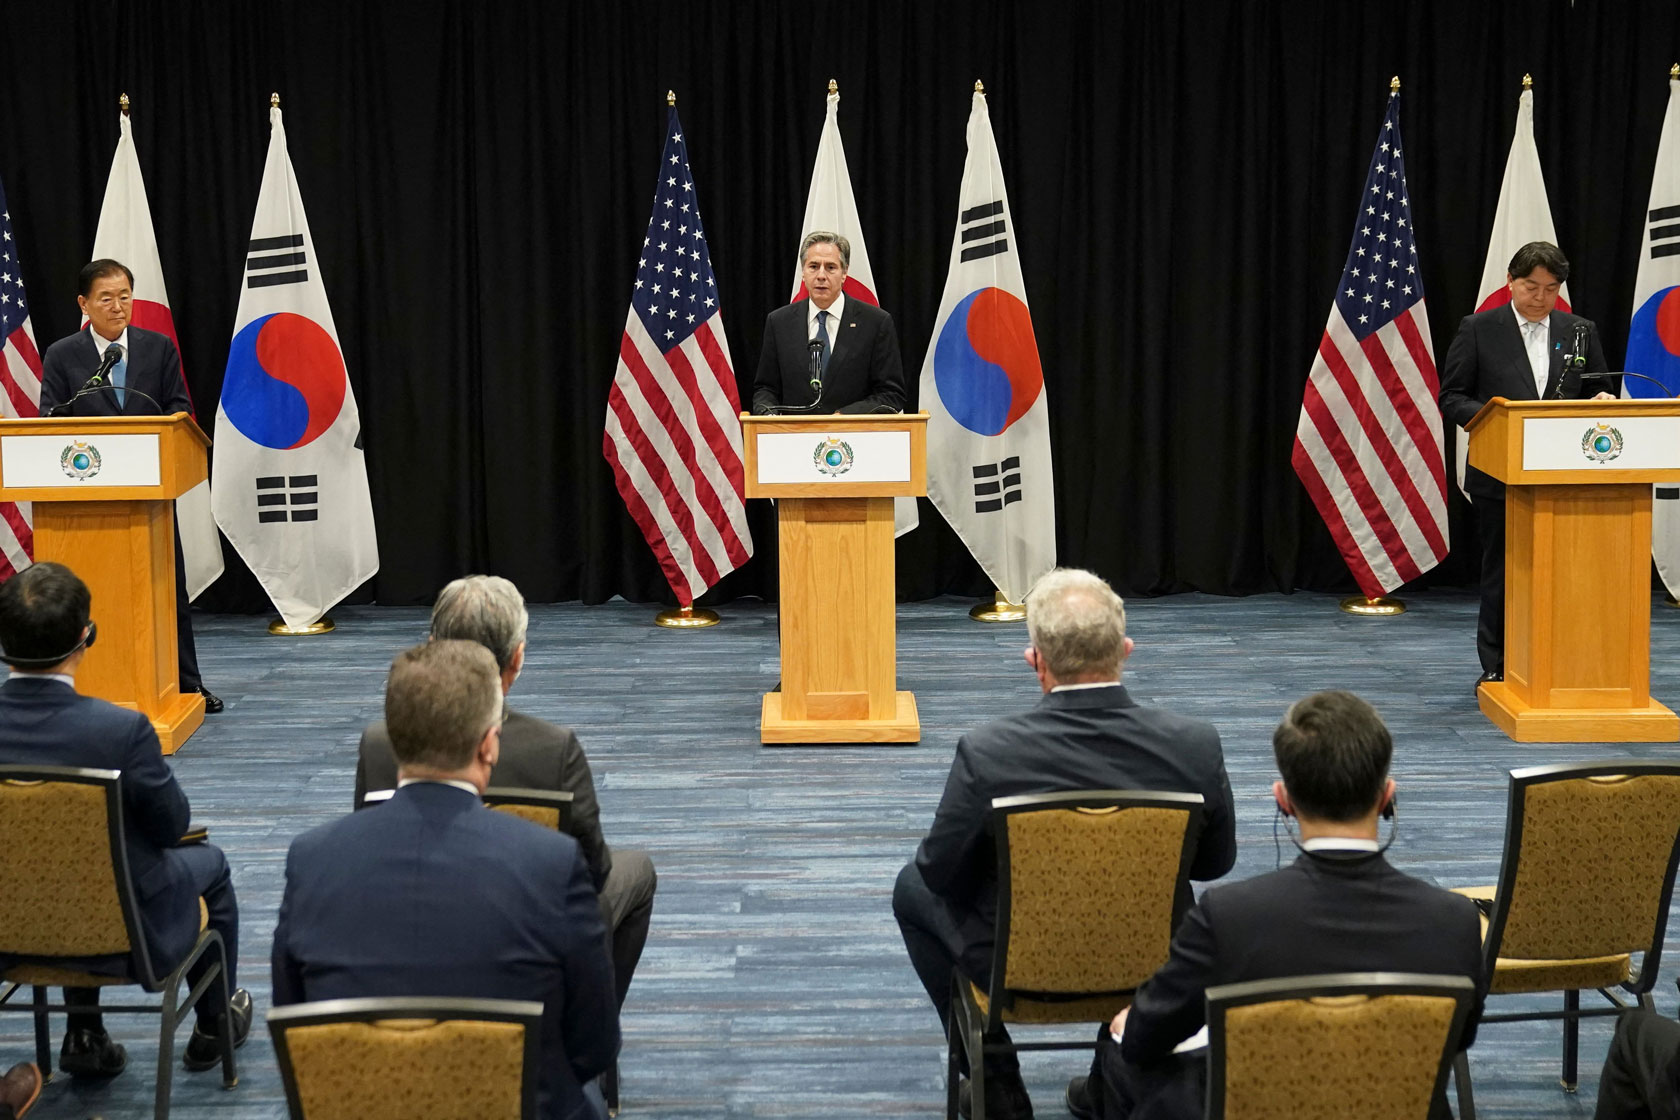 U.S. Secretary of State Blinken speaks during a joint press availability with South Korean Foreign Minister Chung and Japanese Foreign Minister Hayashi.